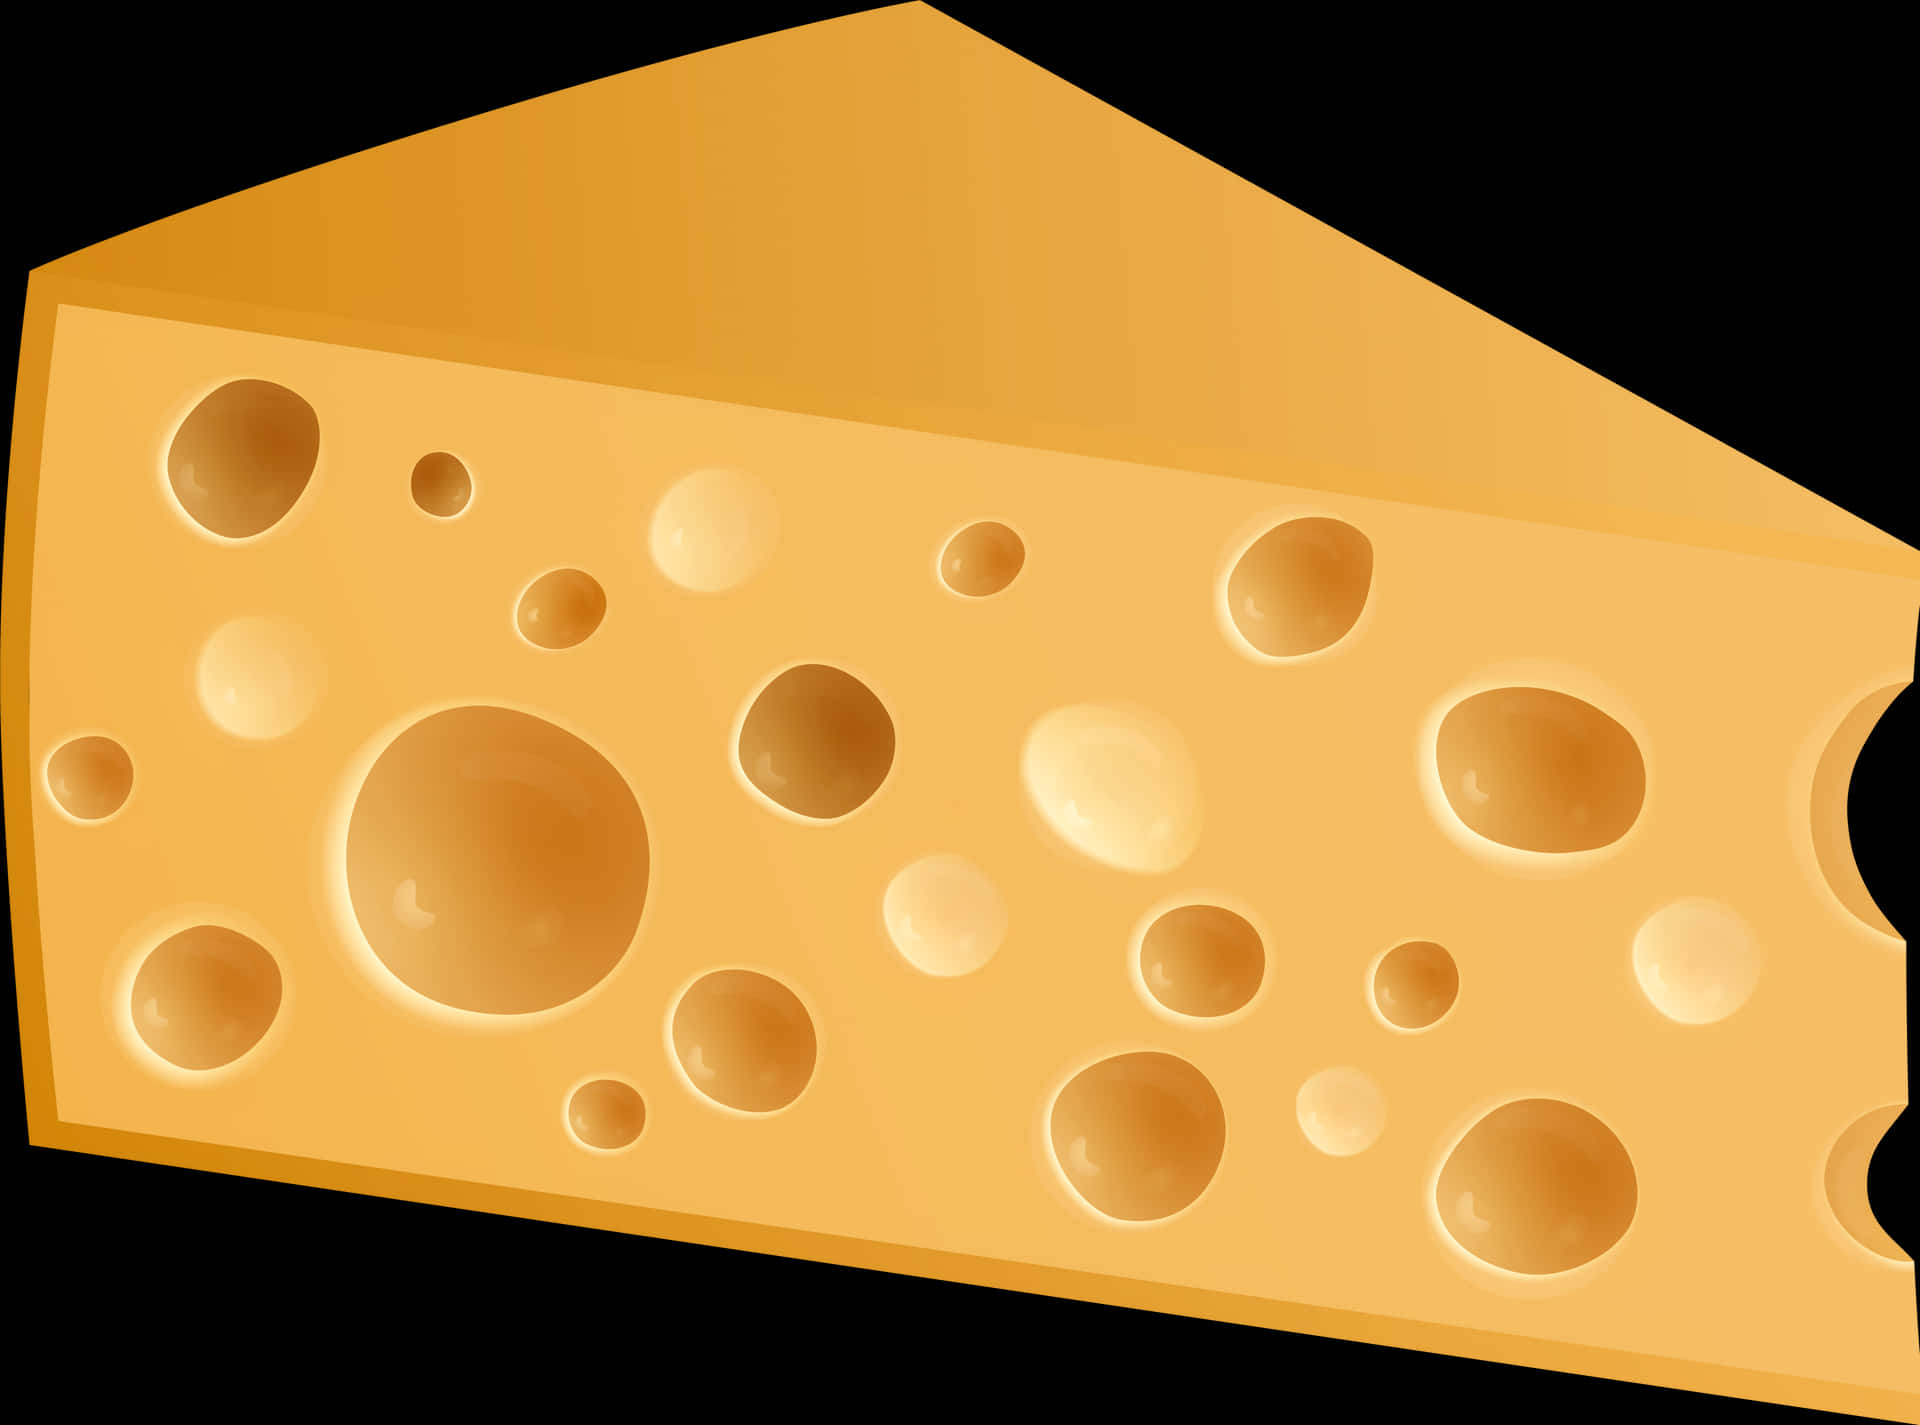 Swiss Cheese Wedge Illustration PNG image